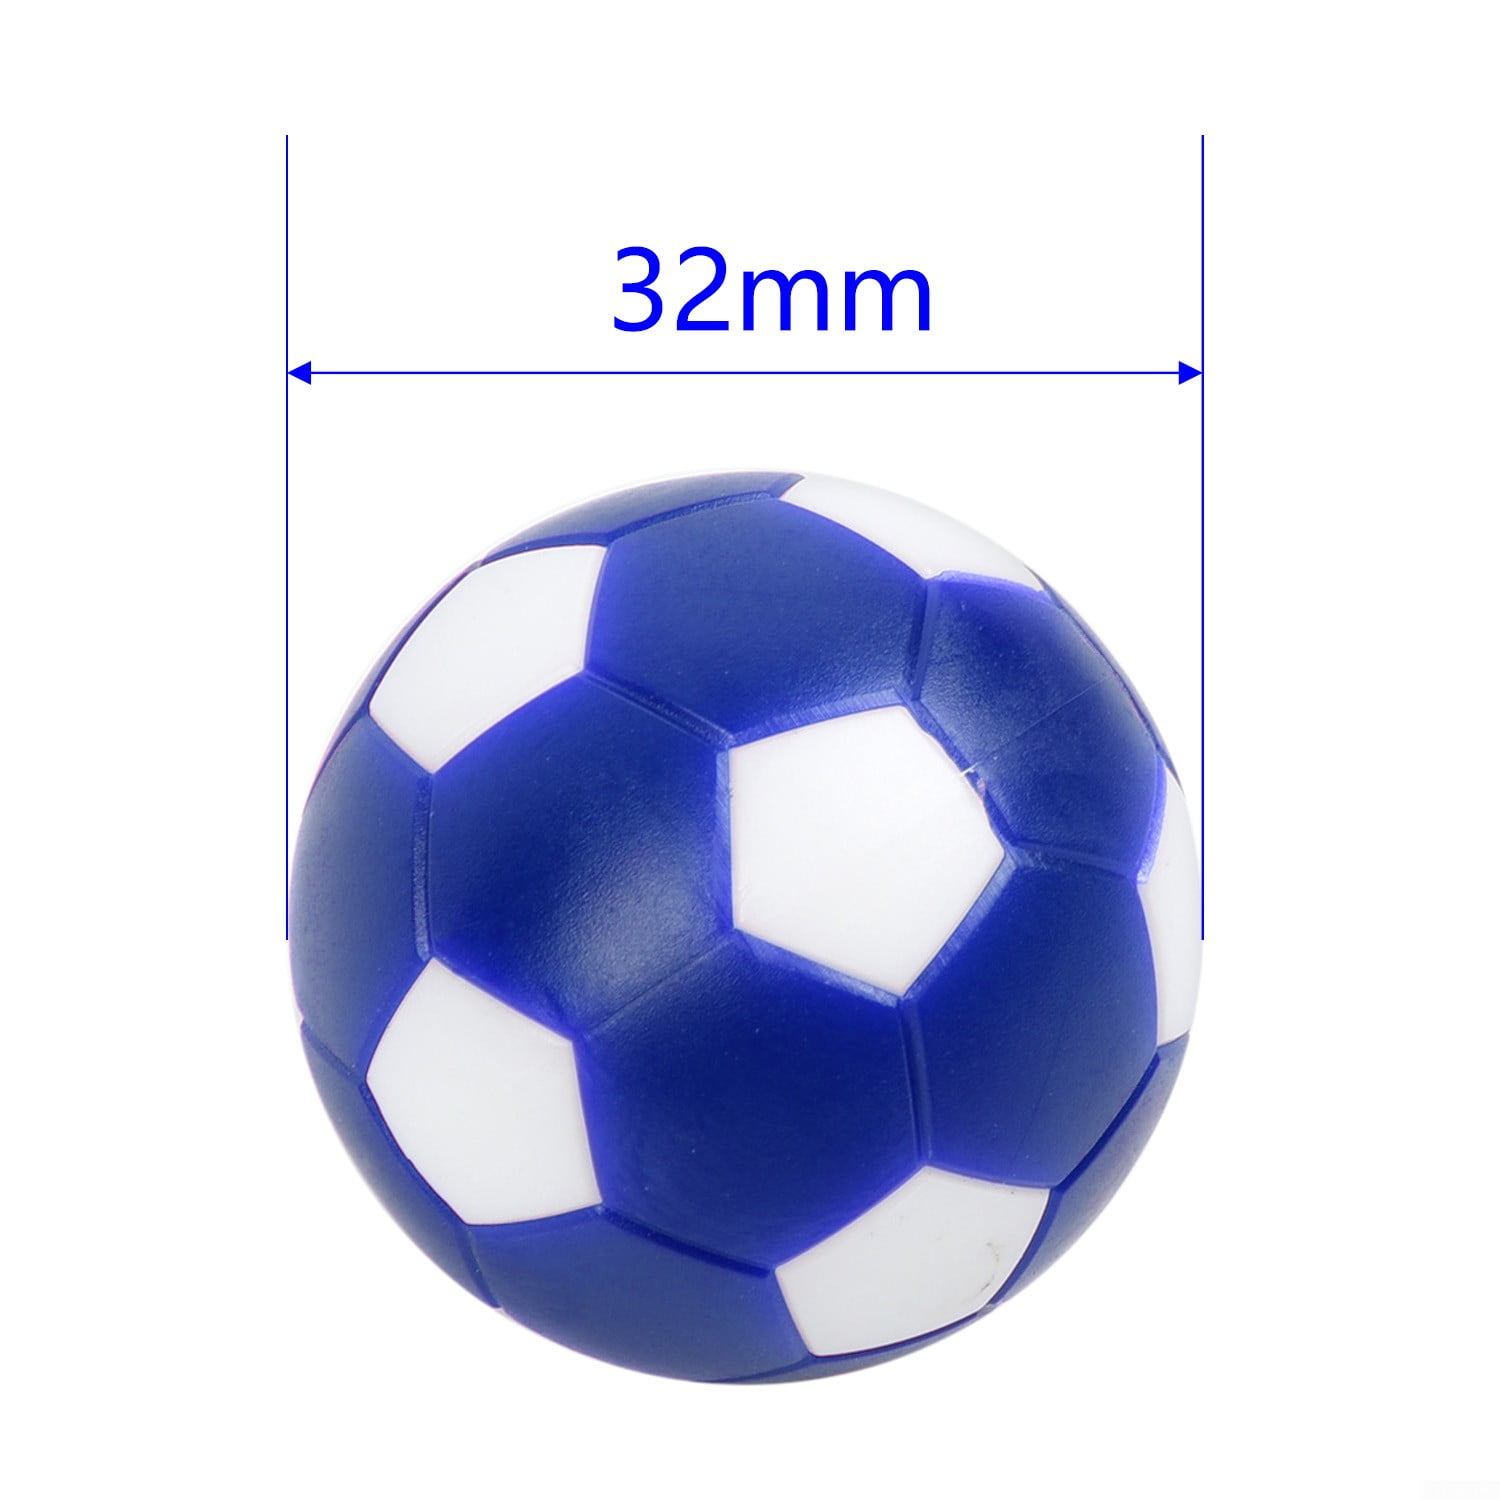 12pcs 32mm White Foosball Balls Fussball Ball Replacement for Soccer Table 